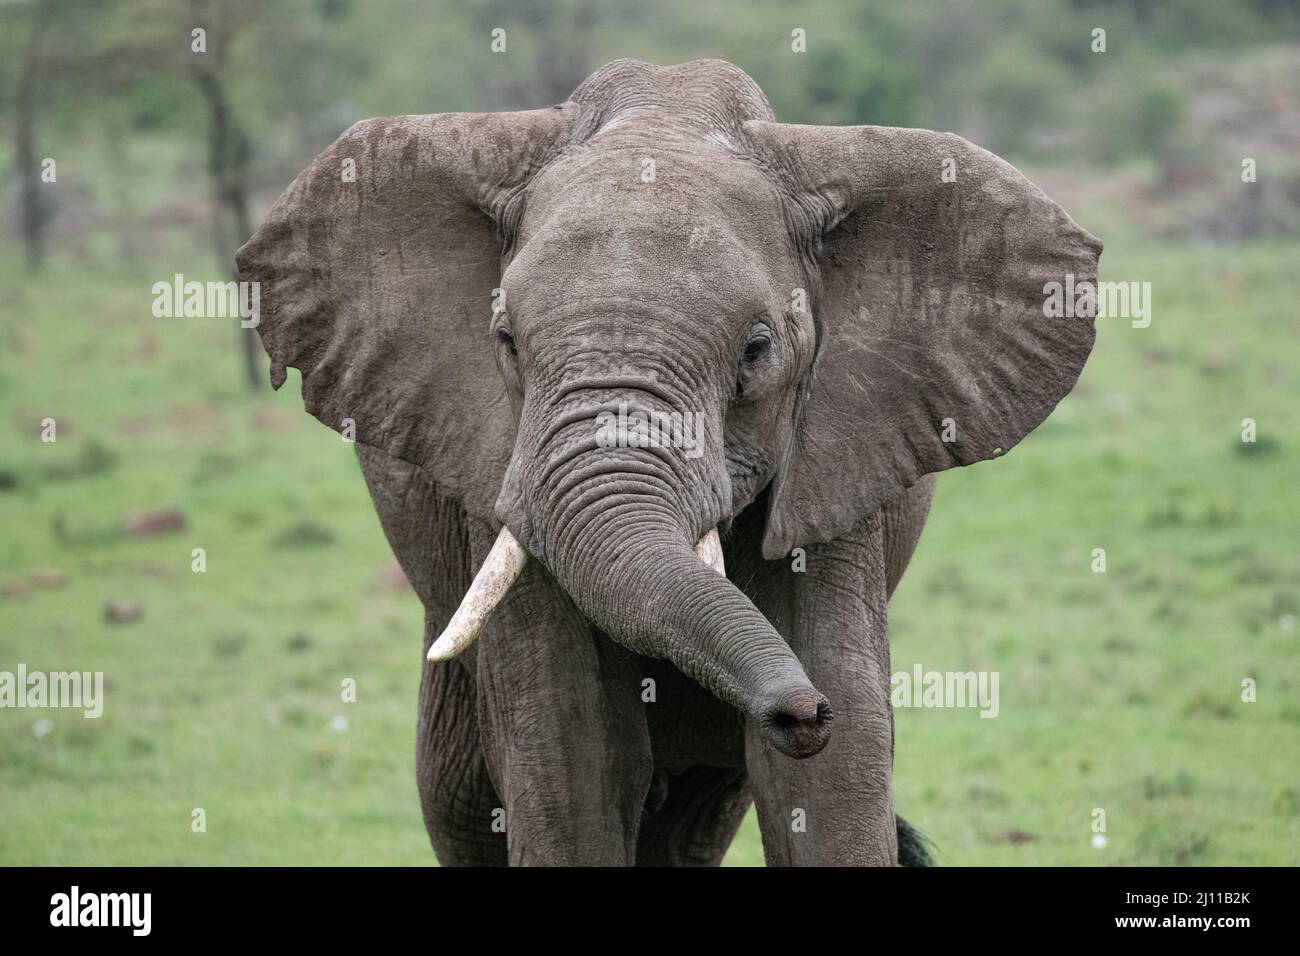 sub adult playful African elephant with trunk extended Stock Photo